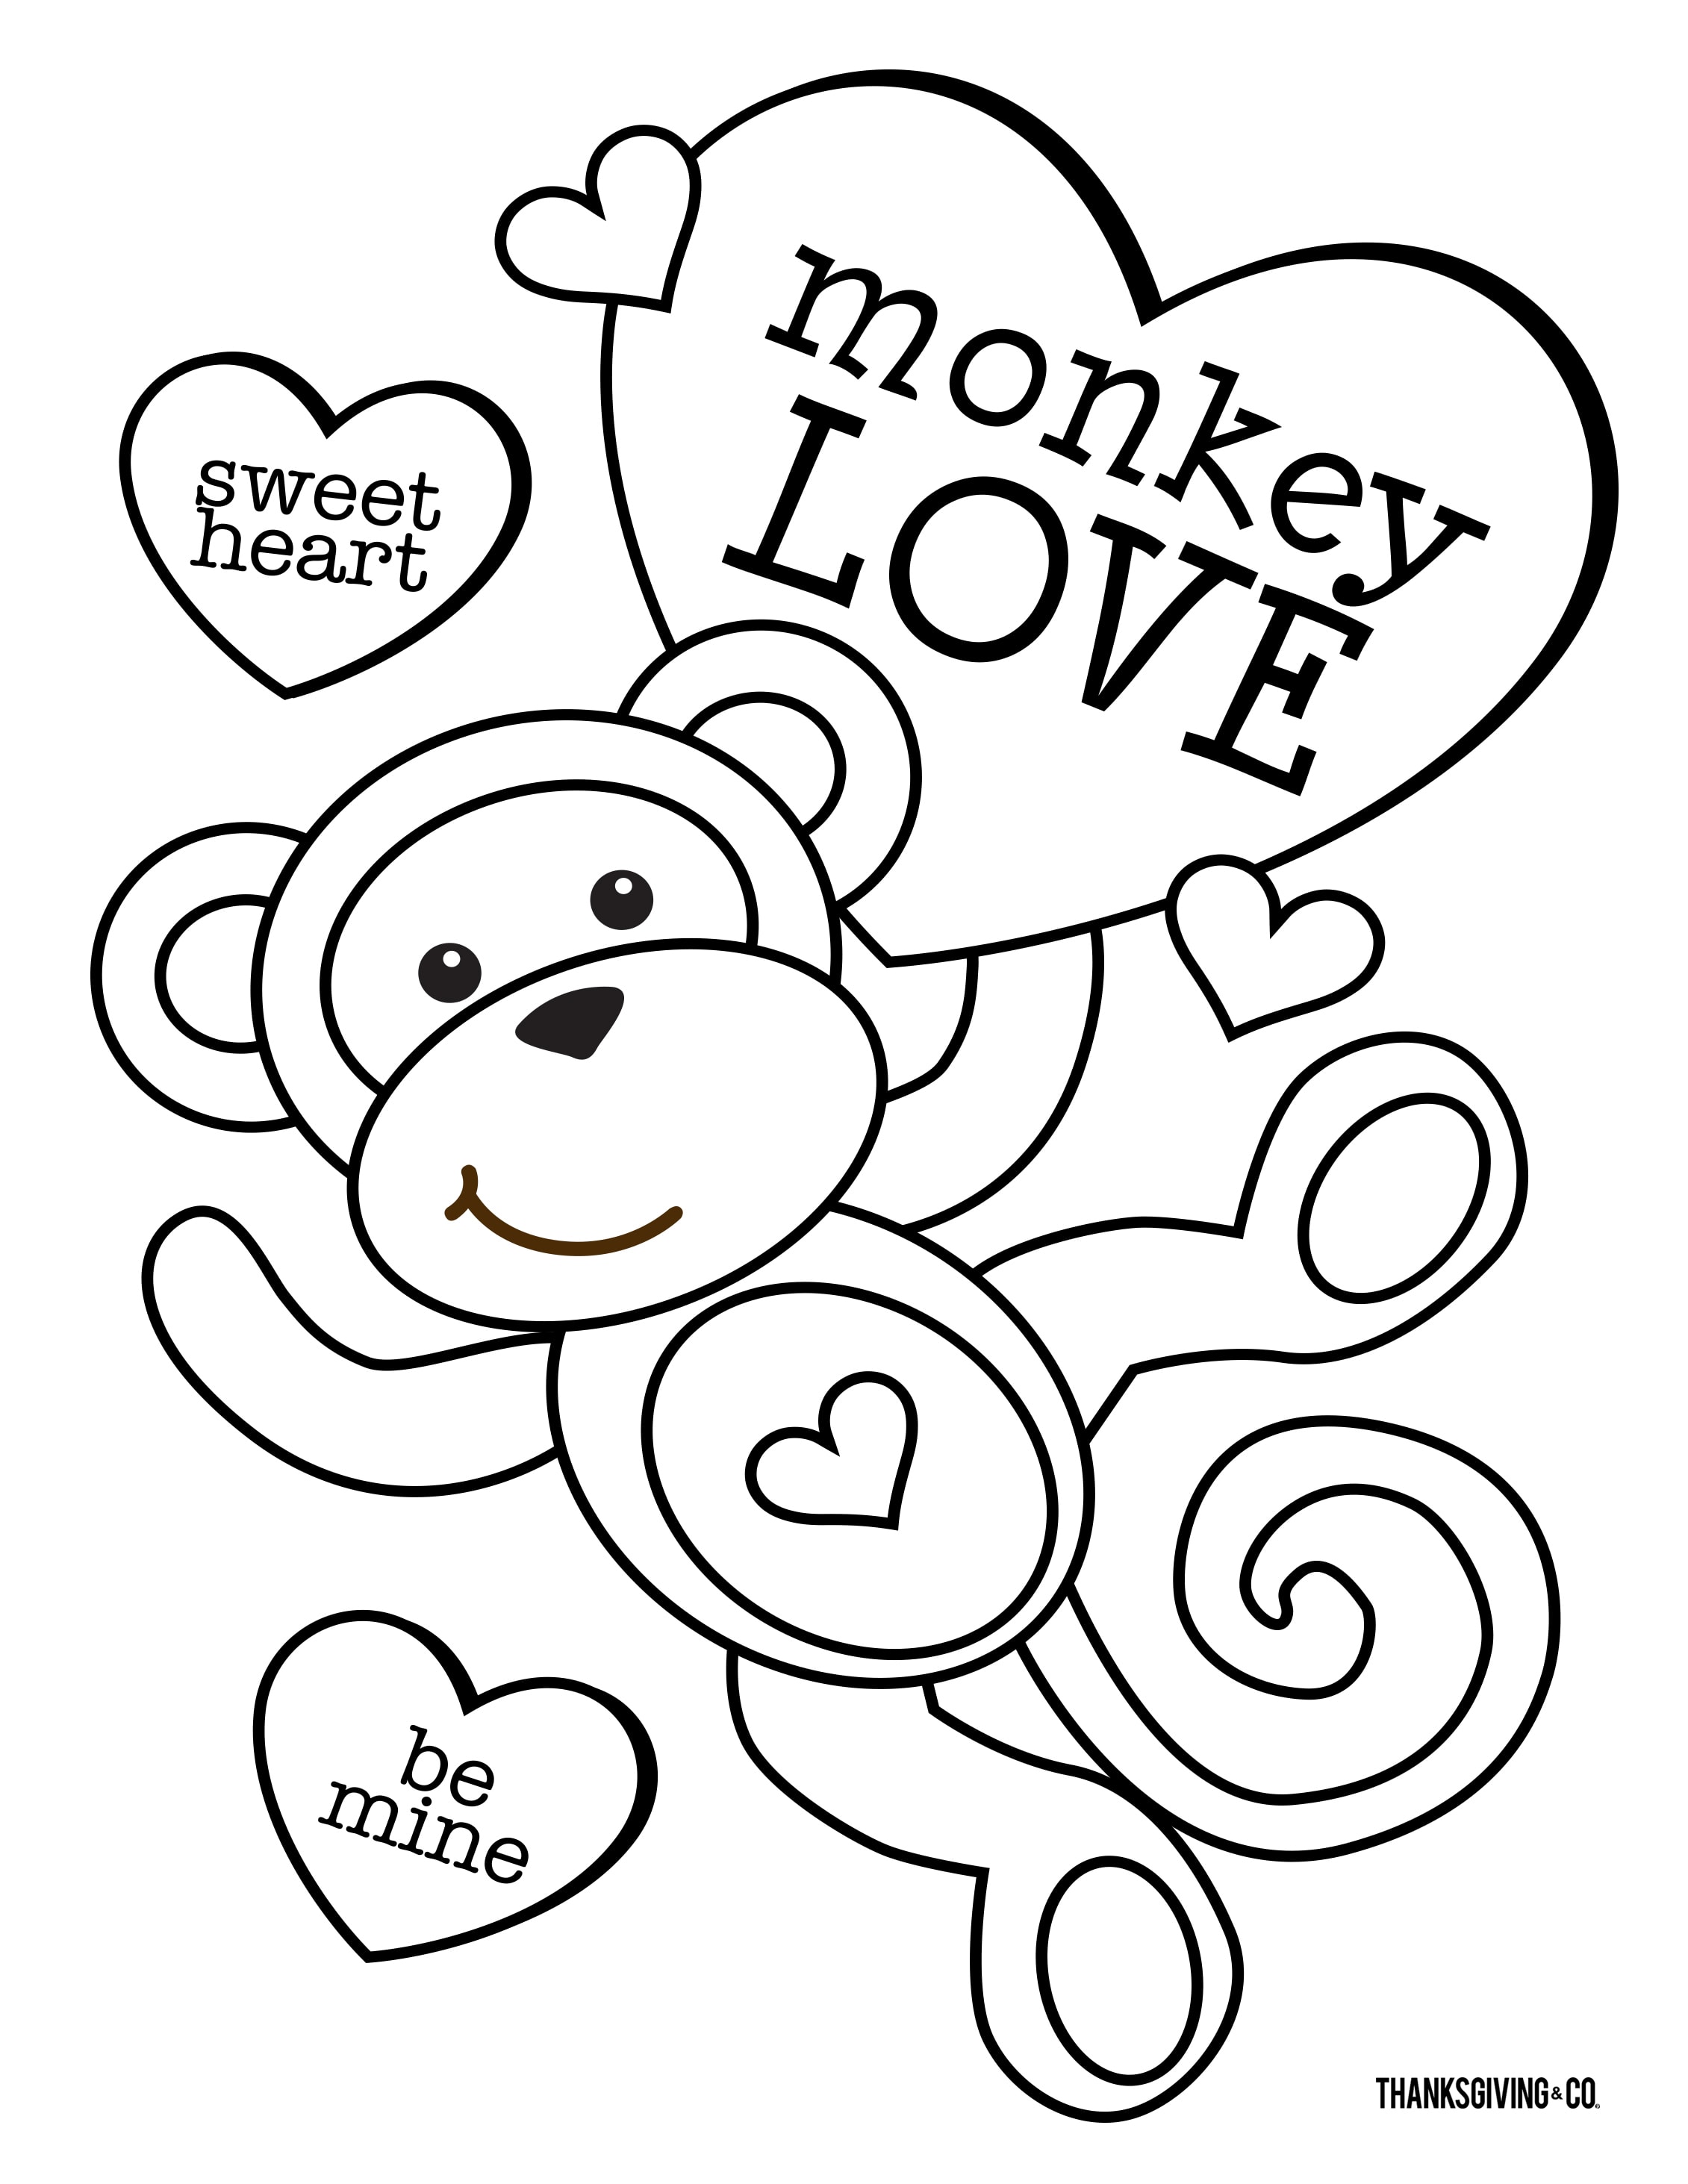 4 free Valentine&39;s Day coloring pages for kids